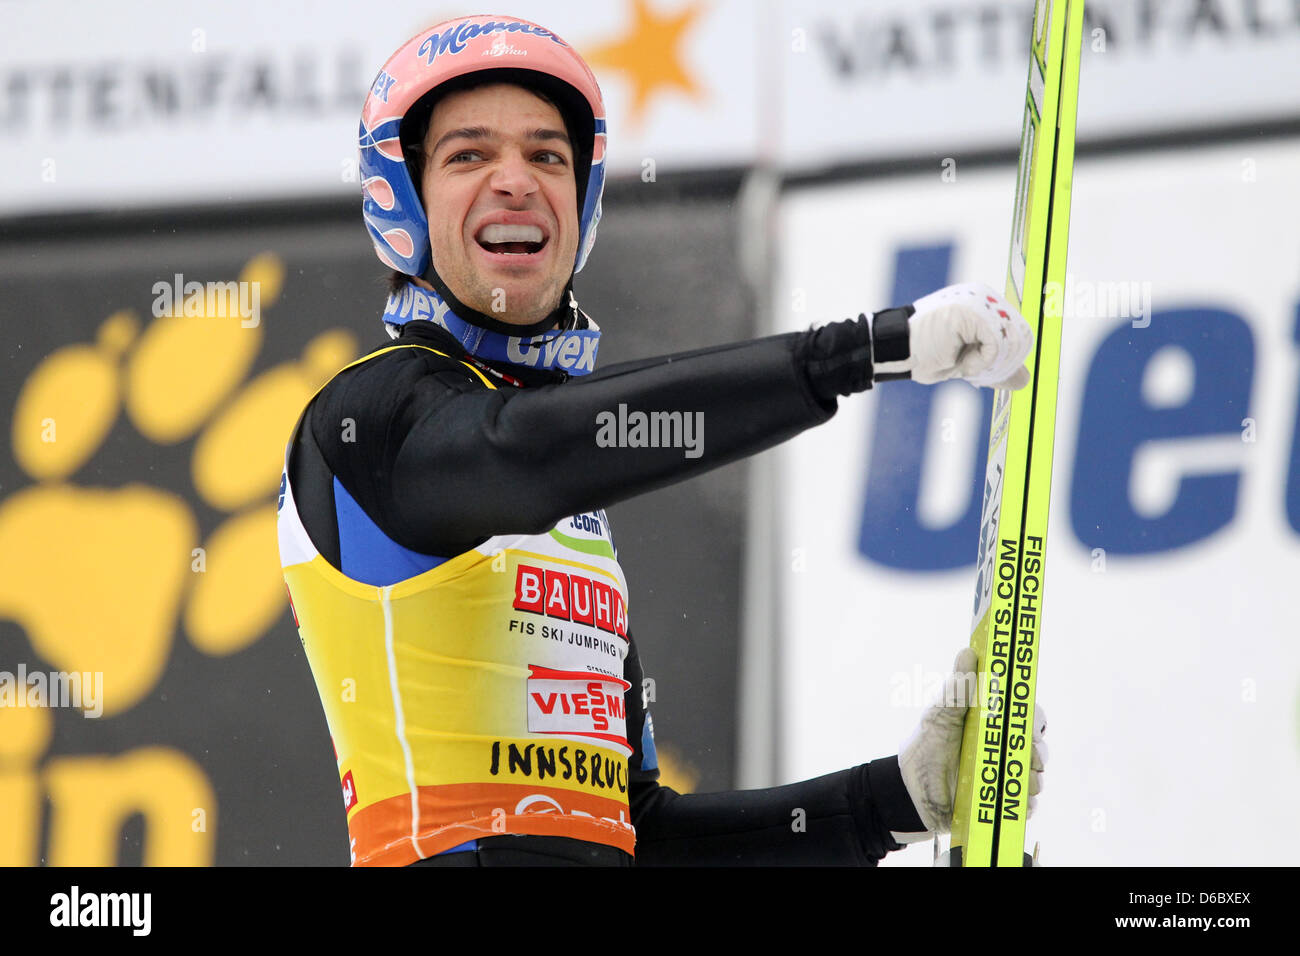 Austrian Ski Jumper Andreas Kofler Celebrates After The Final Round Of The Third Jump At The